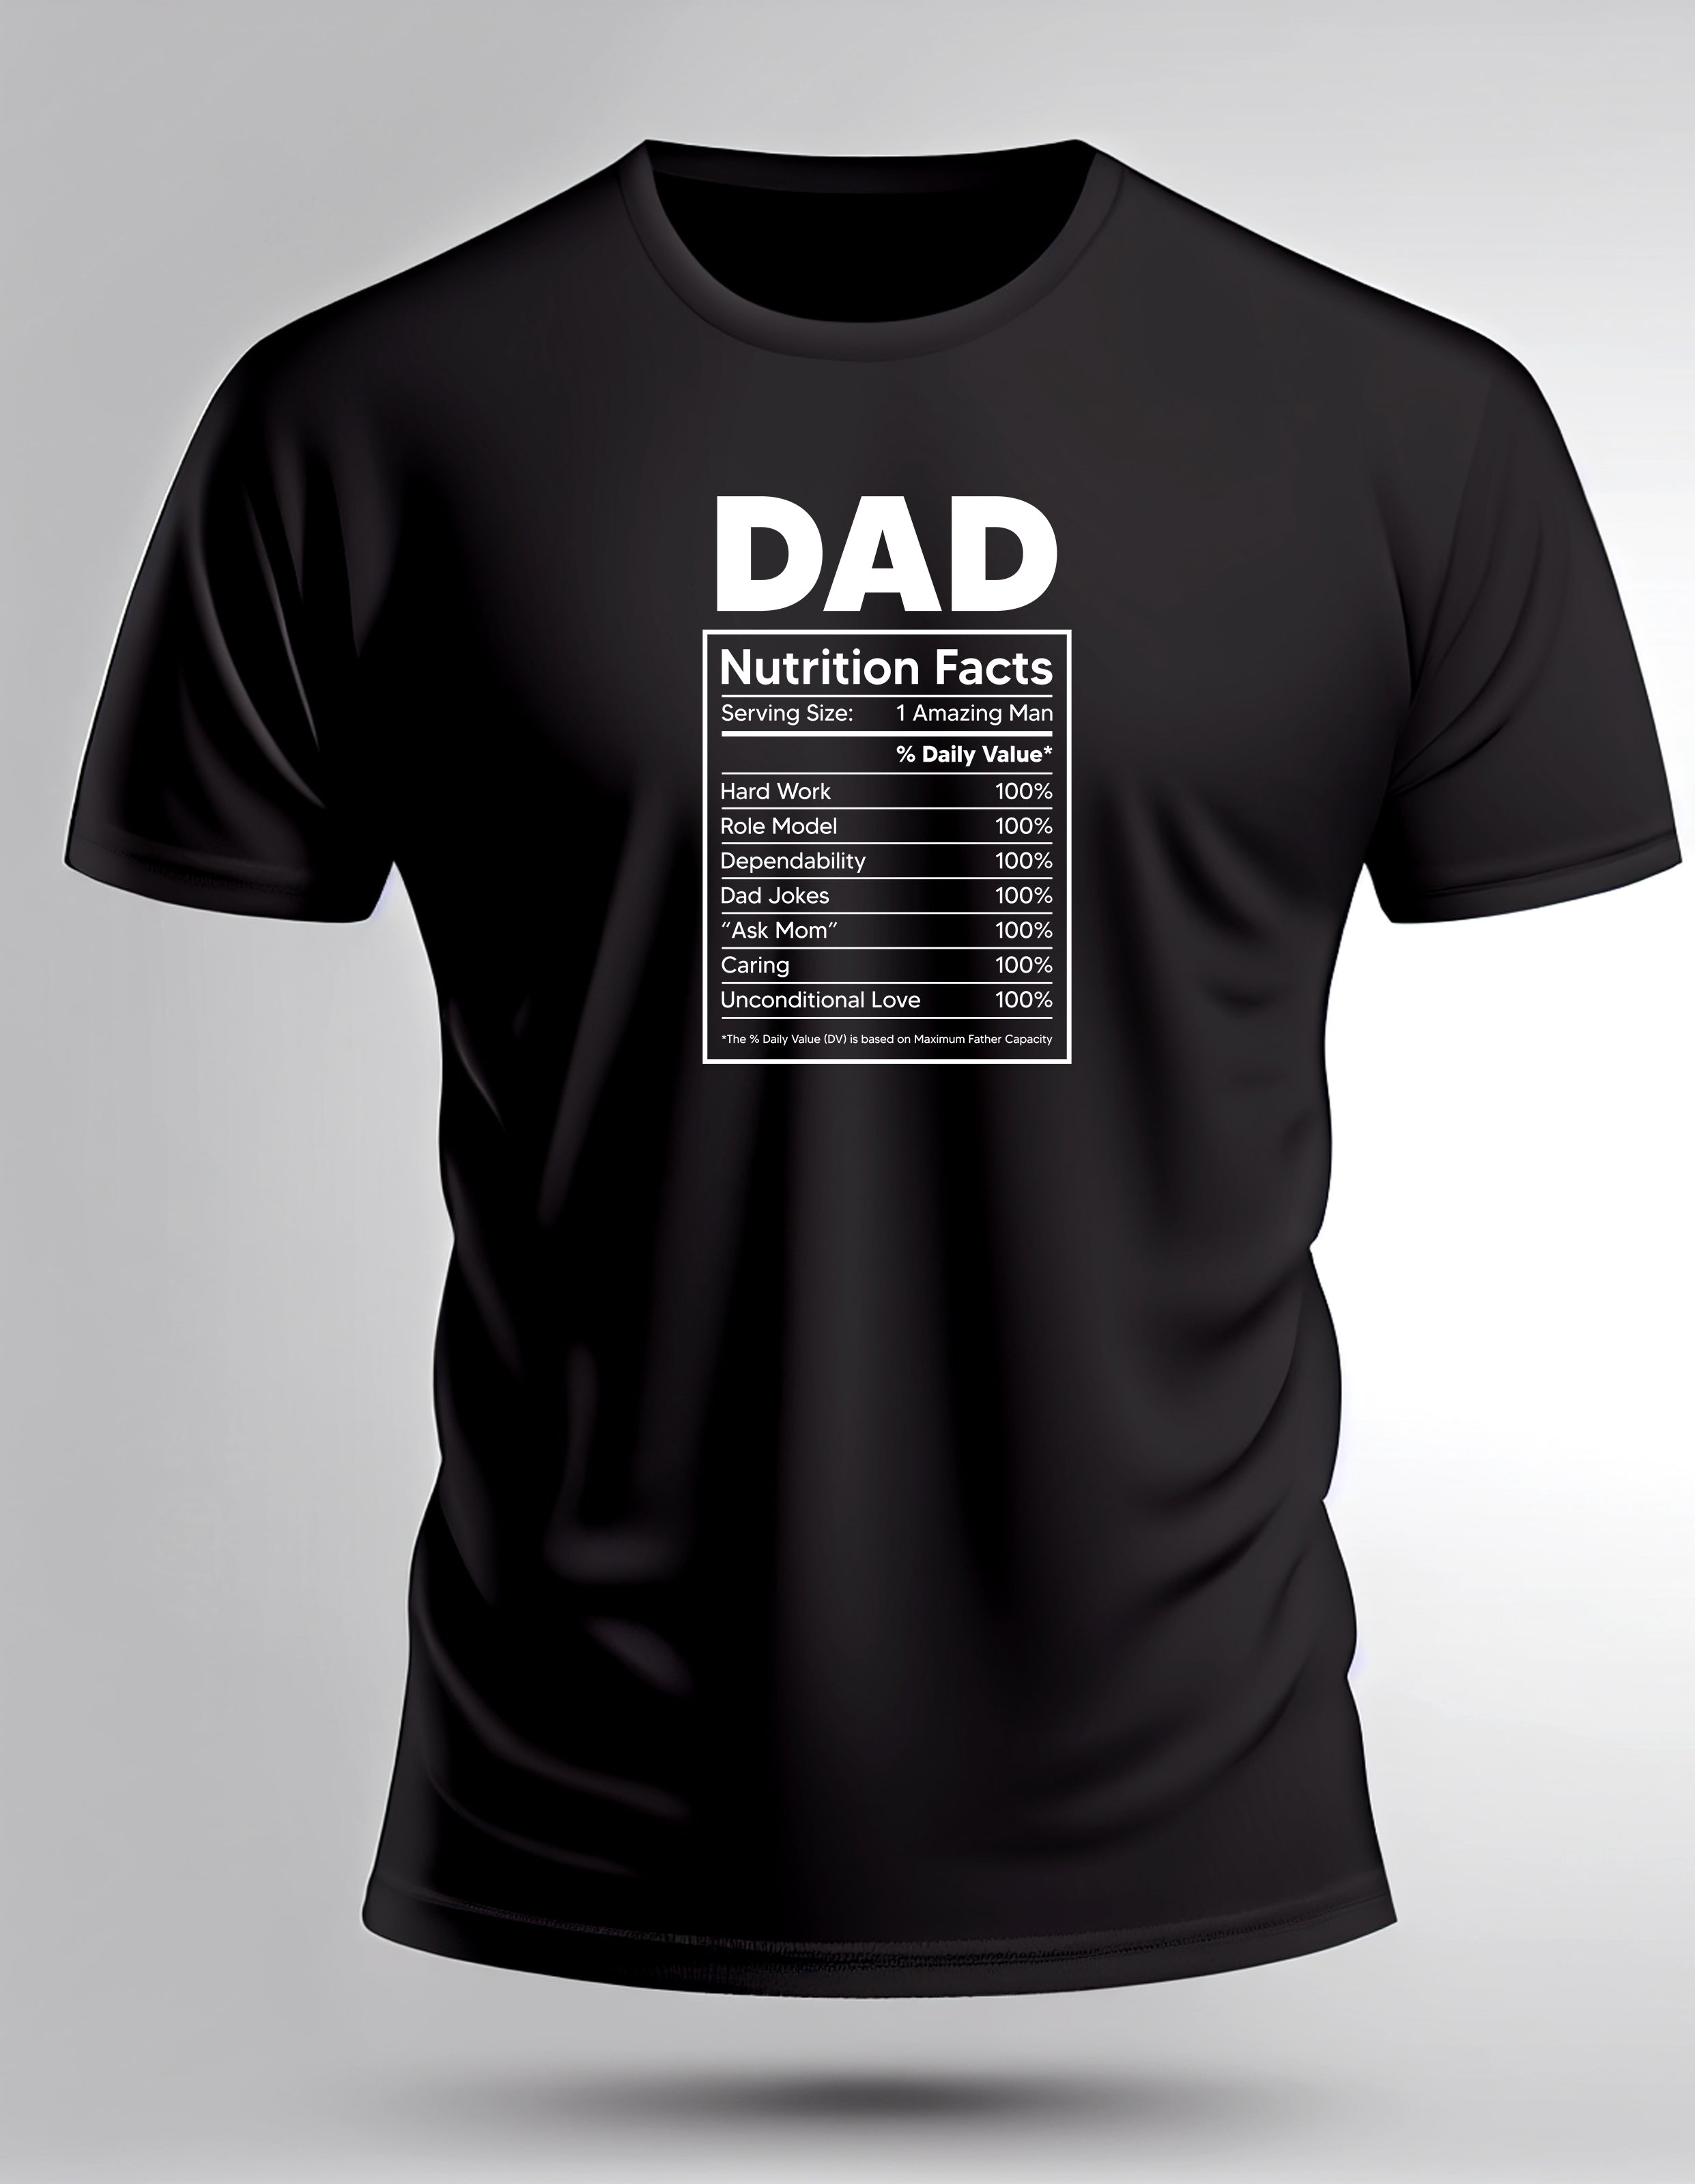 Dad Nutrition Facts T Shirt